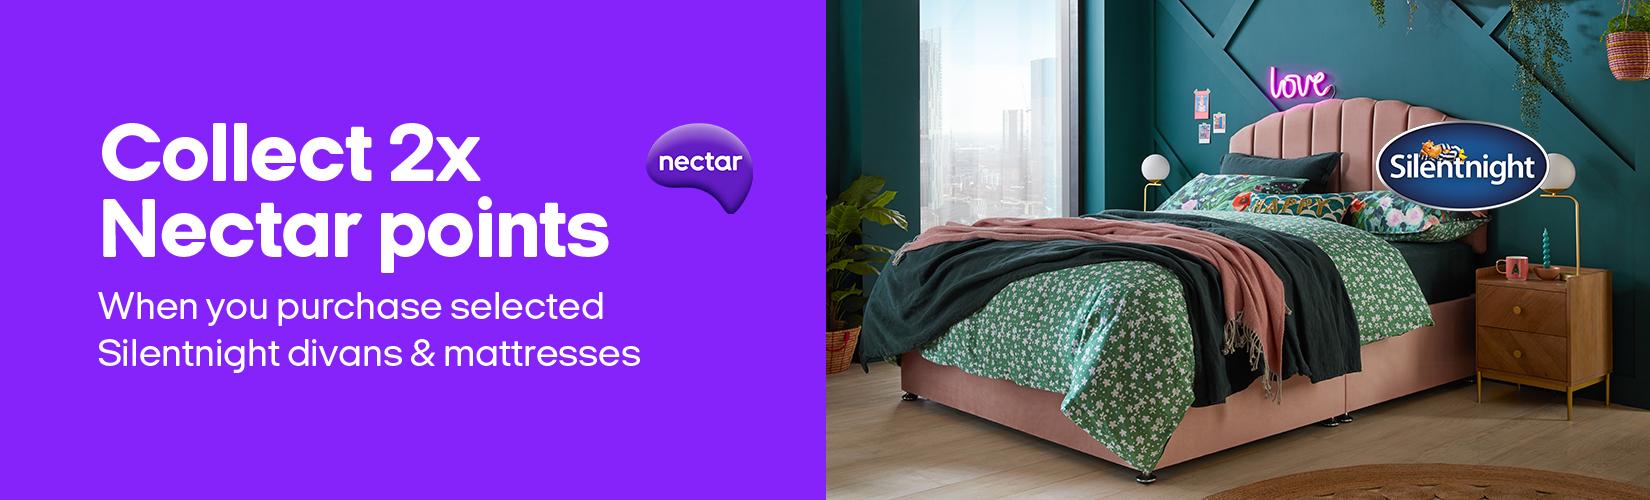 Nectar. Collect 2x Nectar points. When you purchase selected Silentnight divans & mattresses.